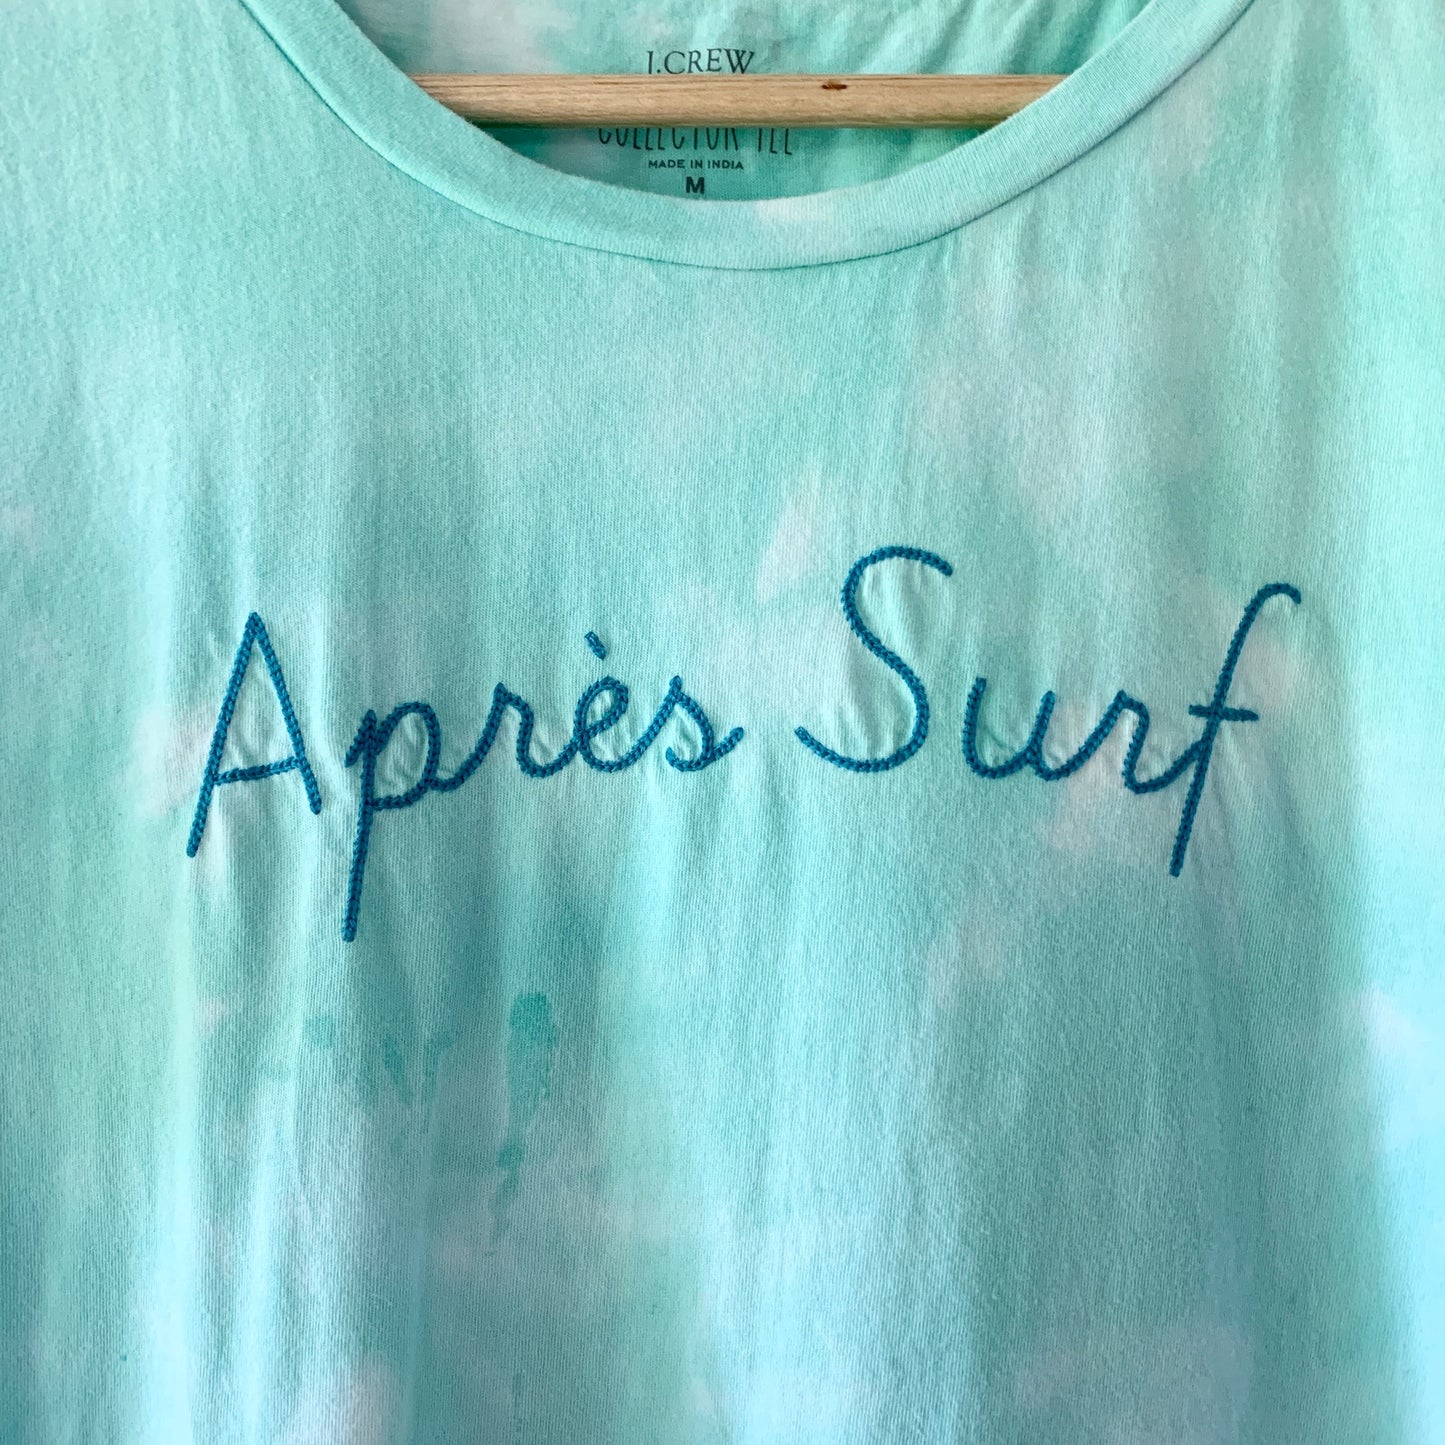 J.CREW Collector Apres Surf Tie Dye T-Shirt Blue White Embroidered Graphic Med